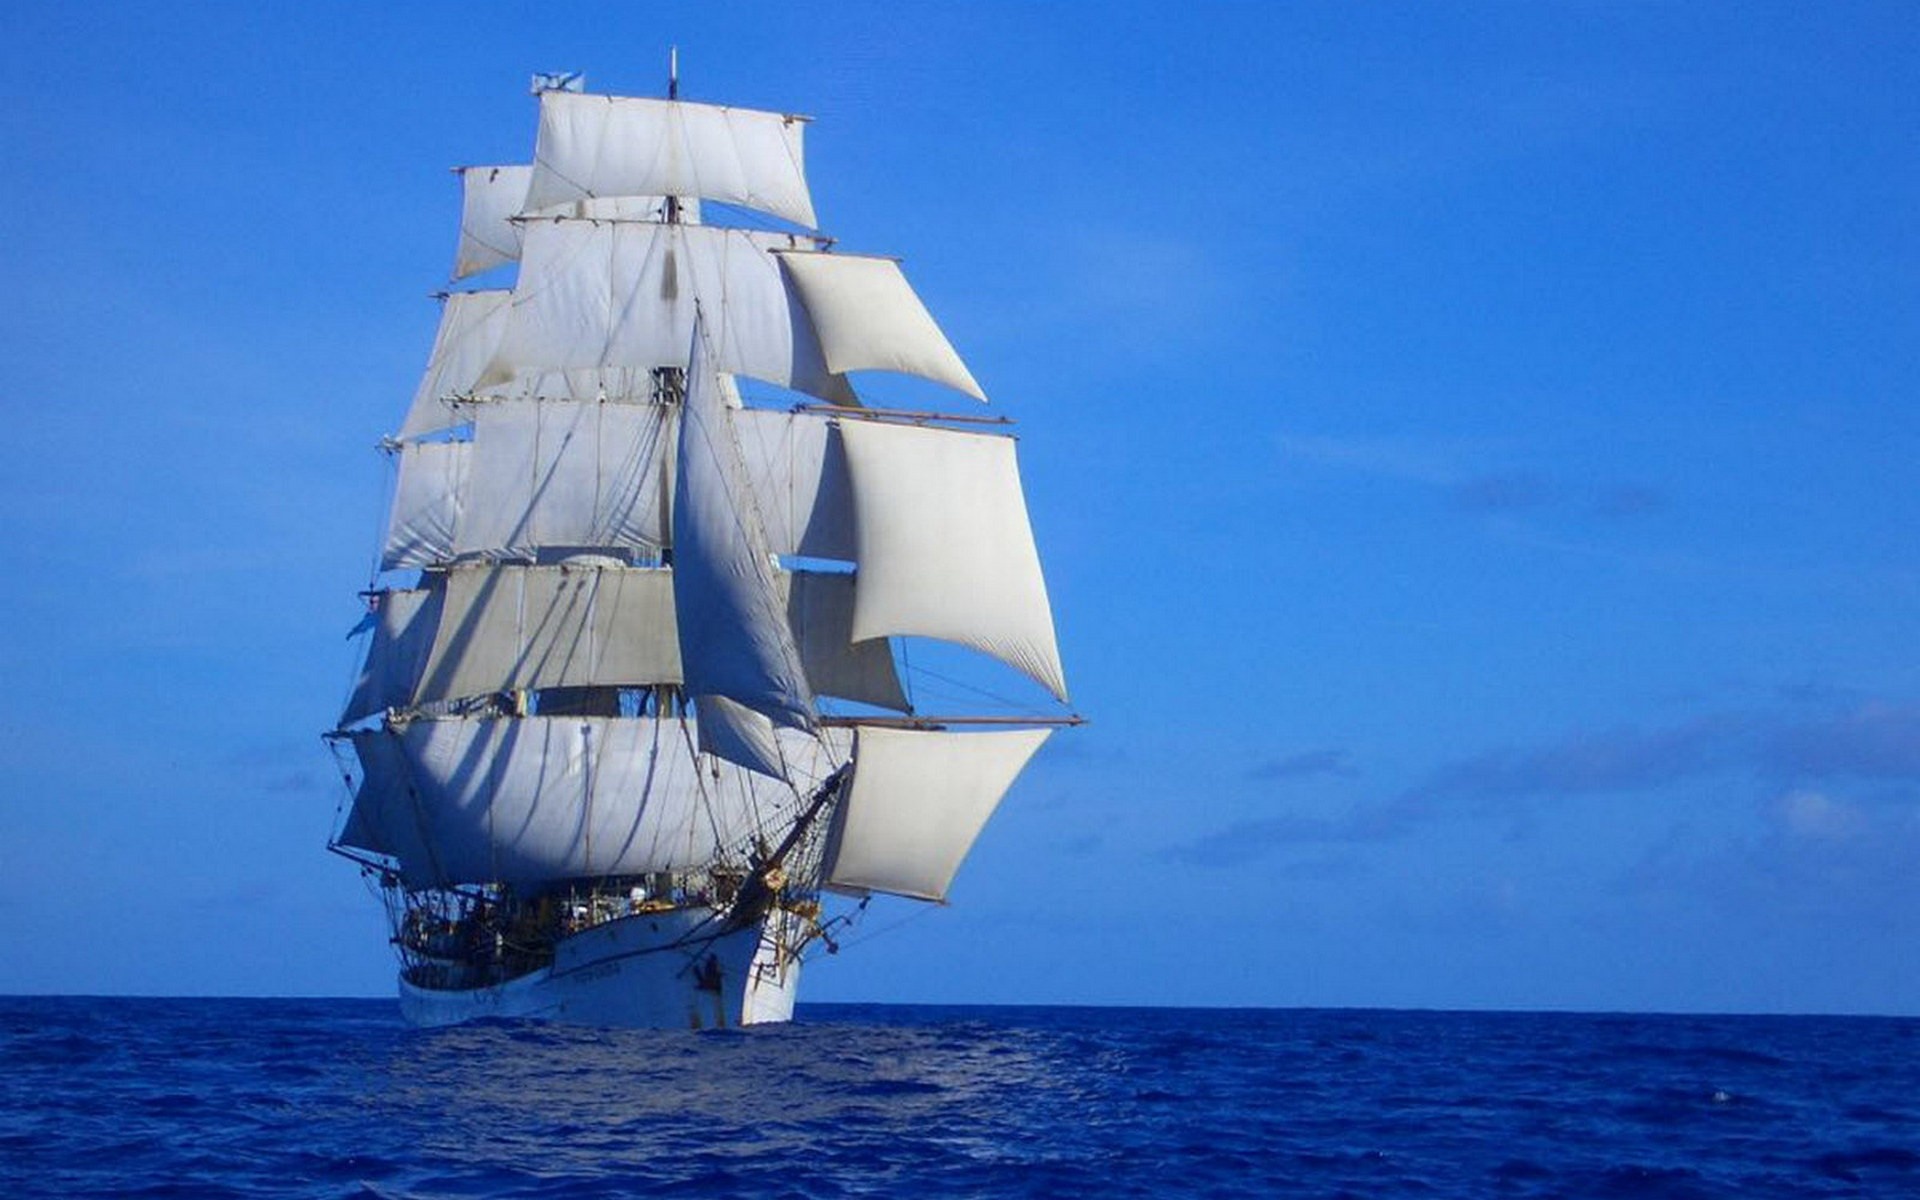 Windjammer: Sailing ship, Barquentine, A sailing vessel of three or more masts. 1920x1200 HD Wallpaper.